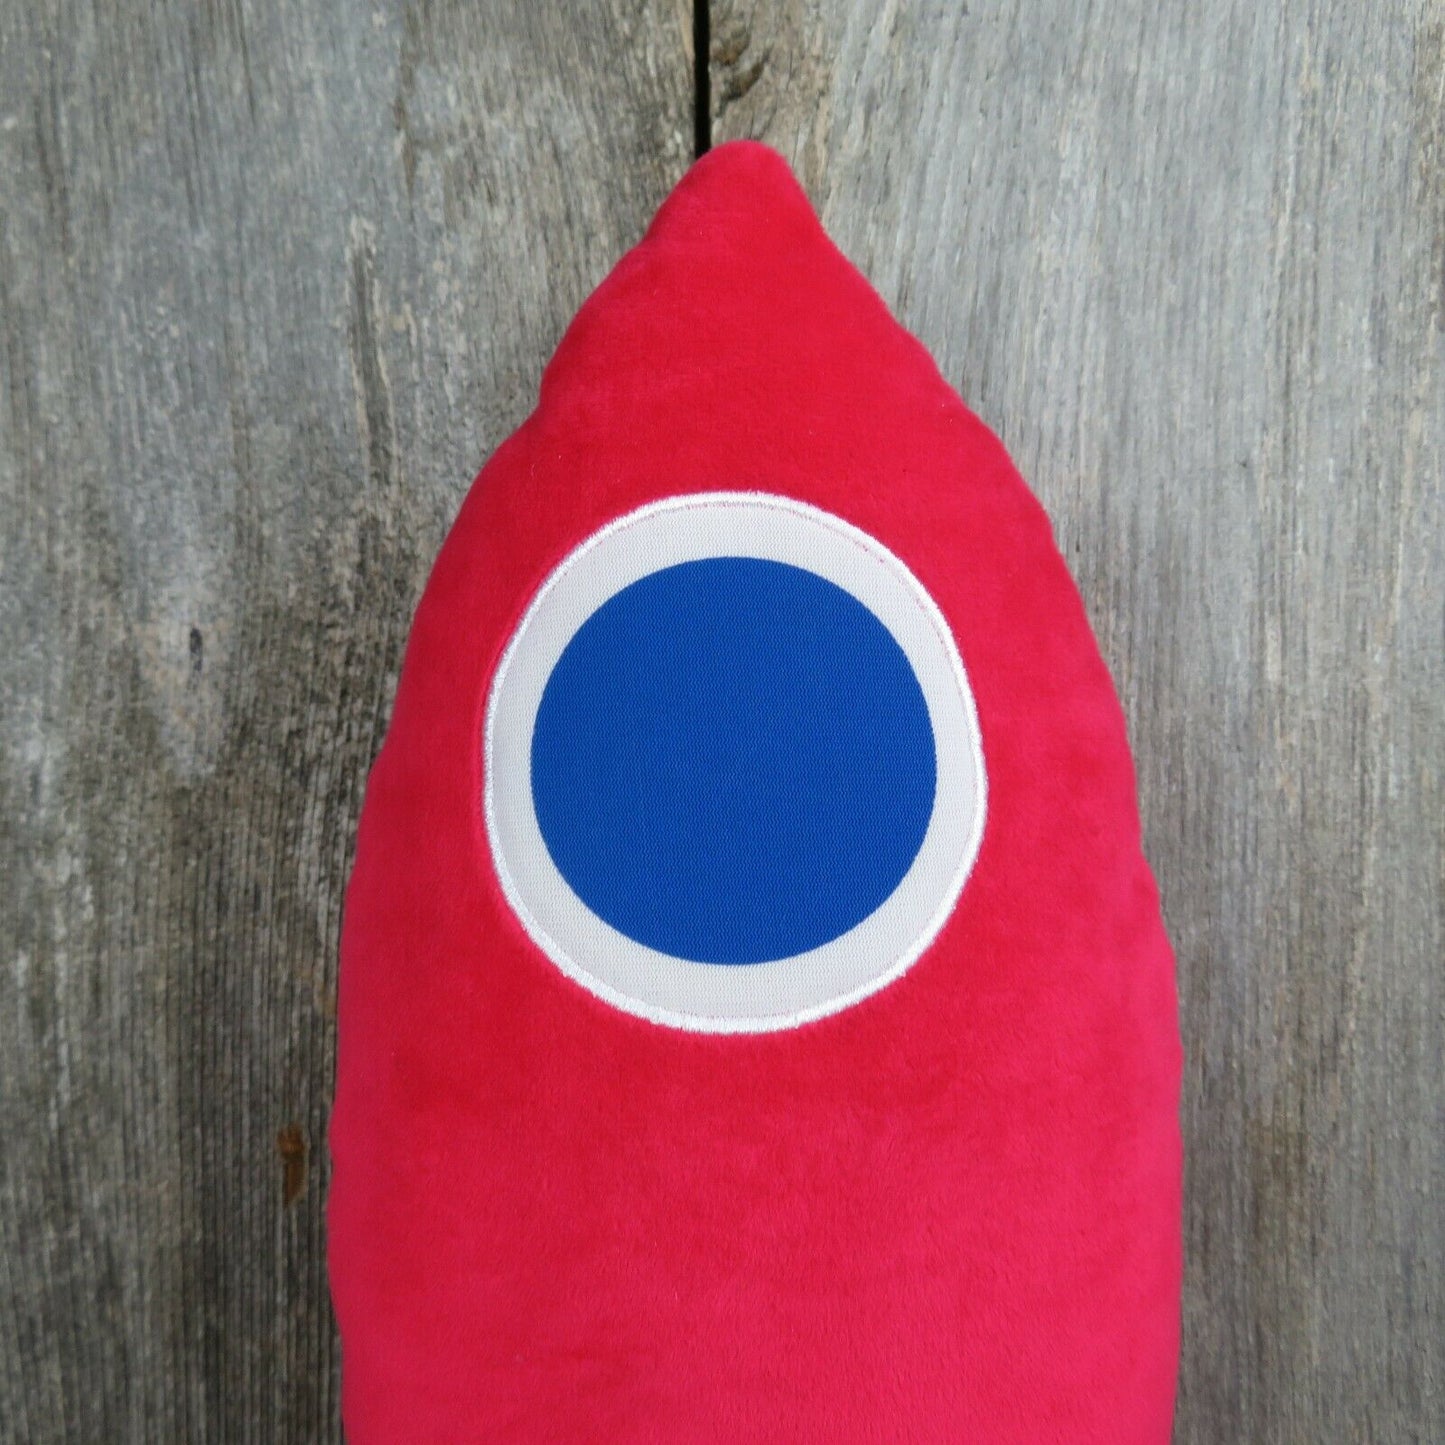 Red Rocket Plush How to Catch a Star Kohls Cares Oliver Jeffers Story Stuffed